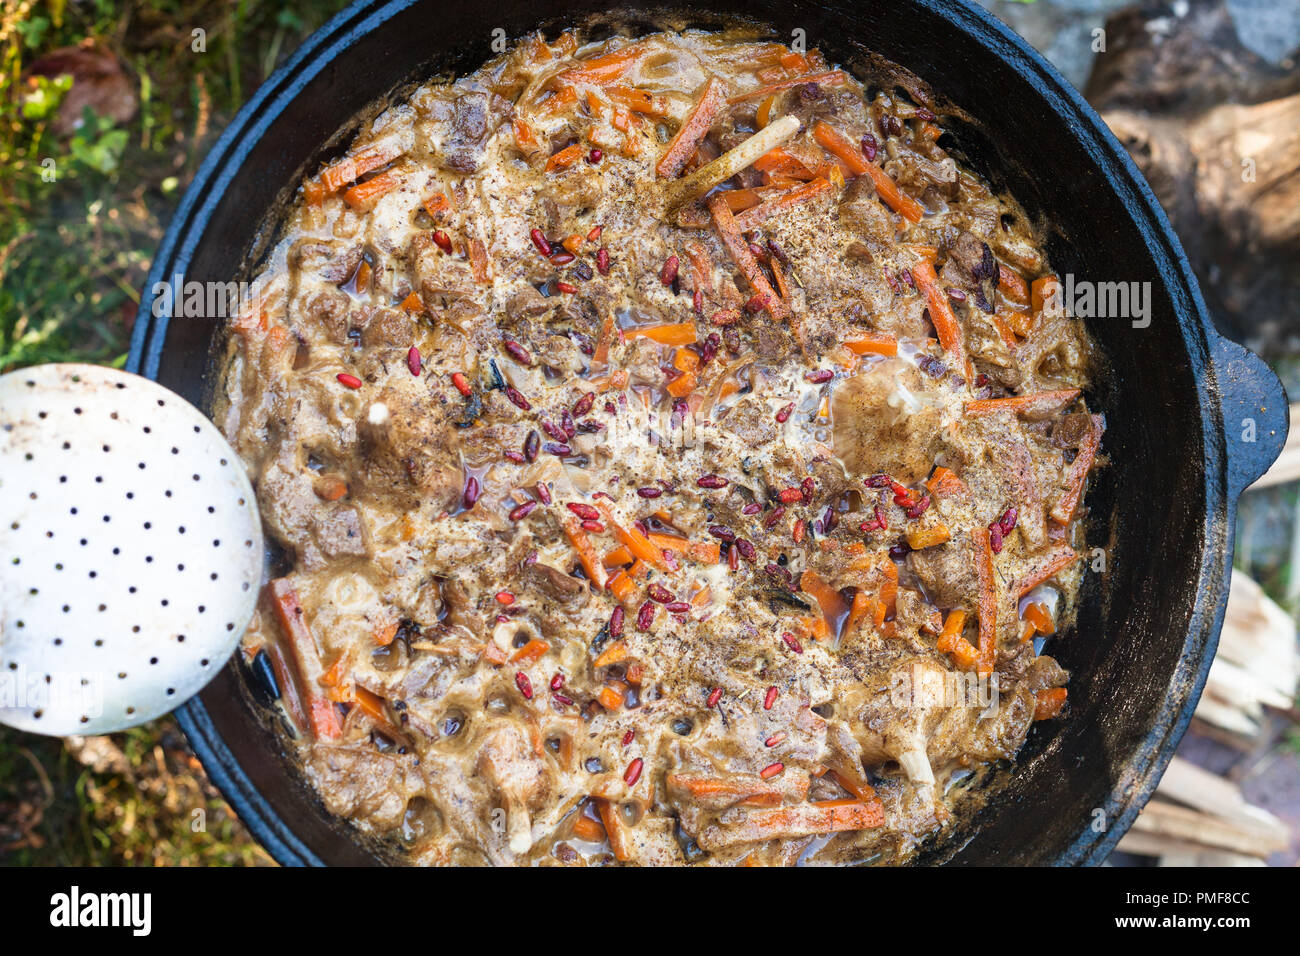 top view of cooking central asian dish plov in kazan pot on oven Stock Photo